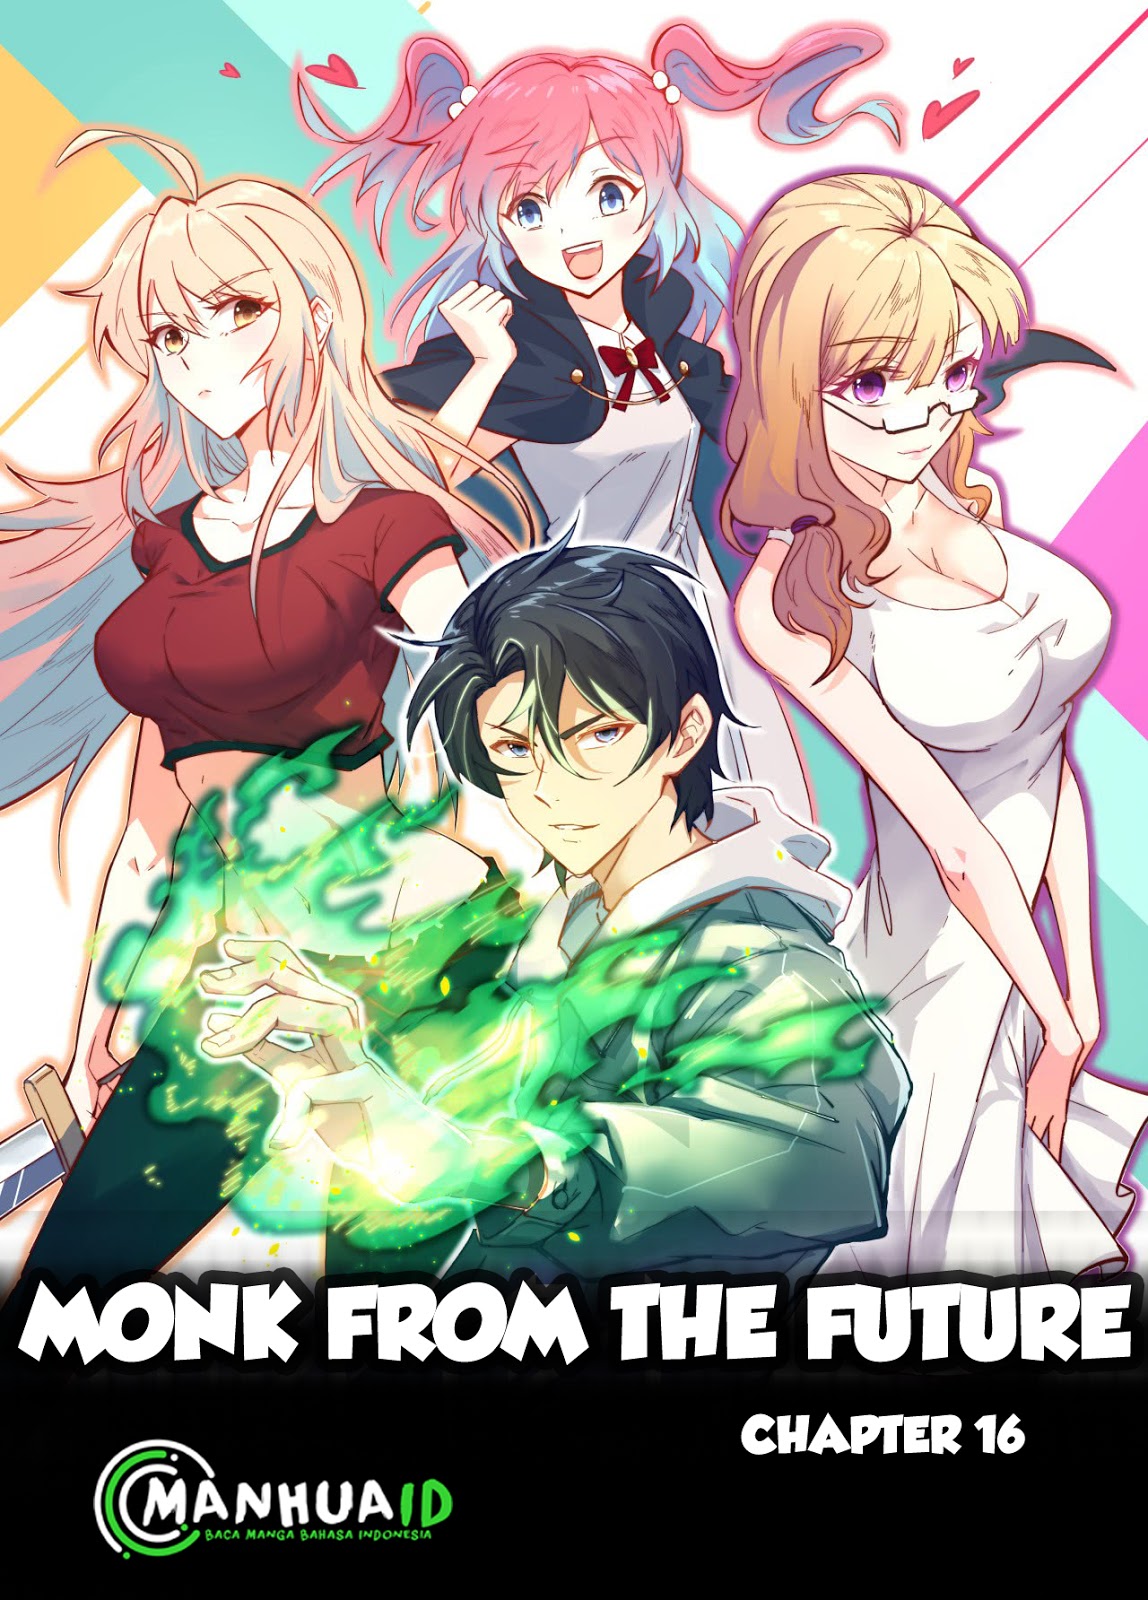 Monk From the Future Chapter 16